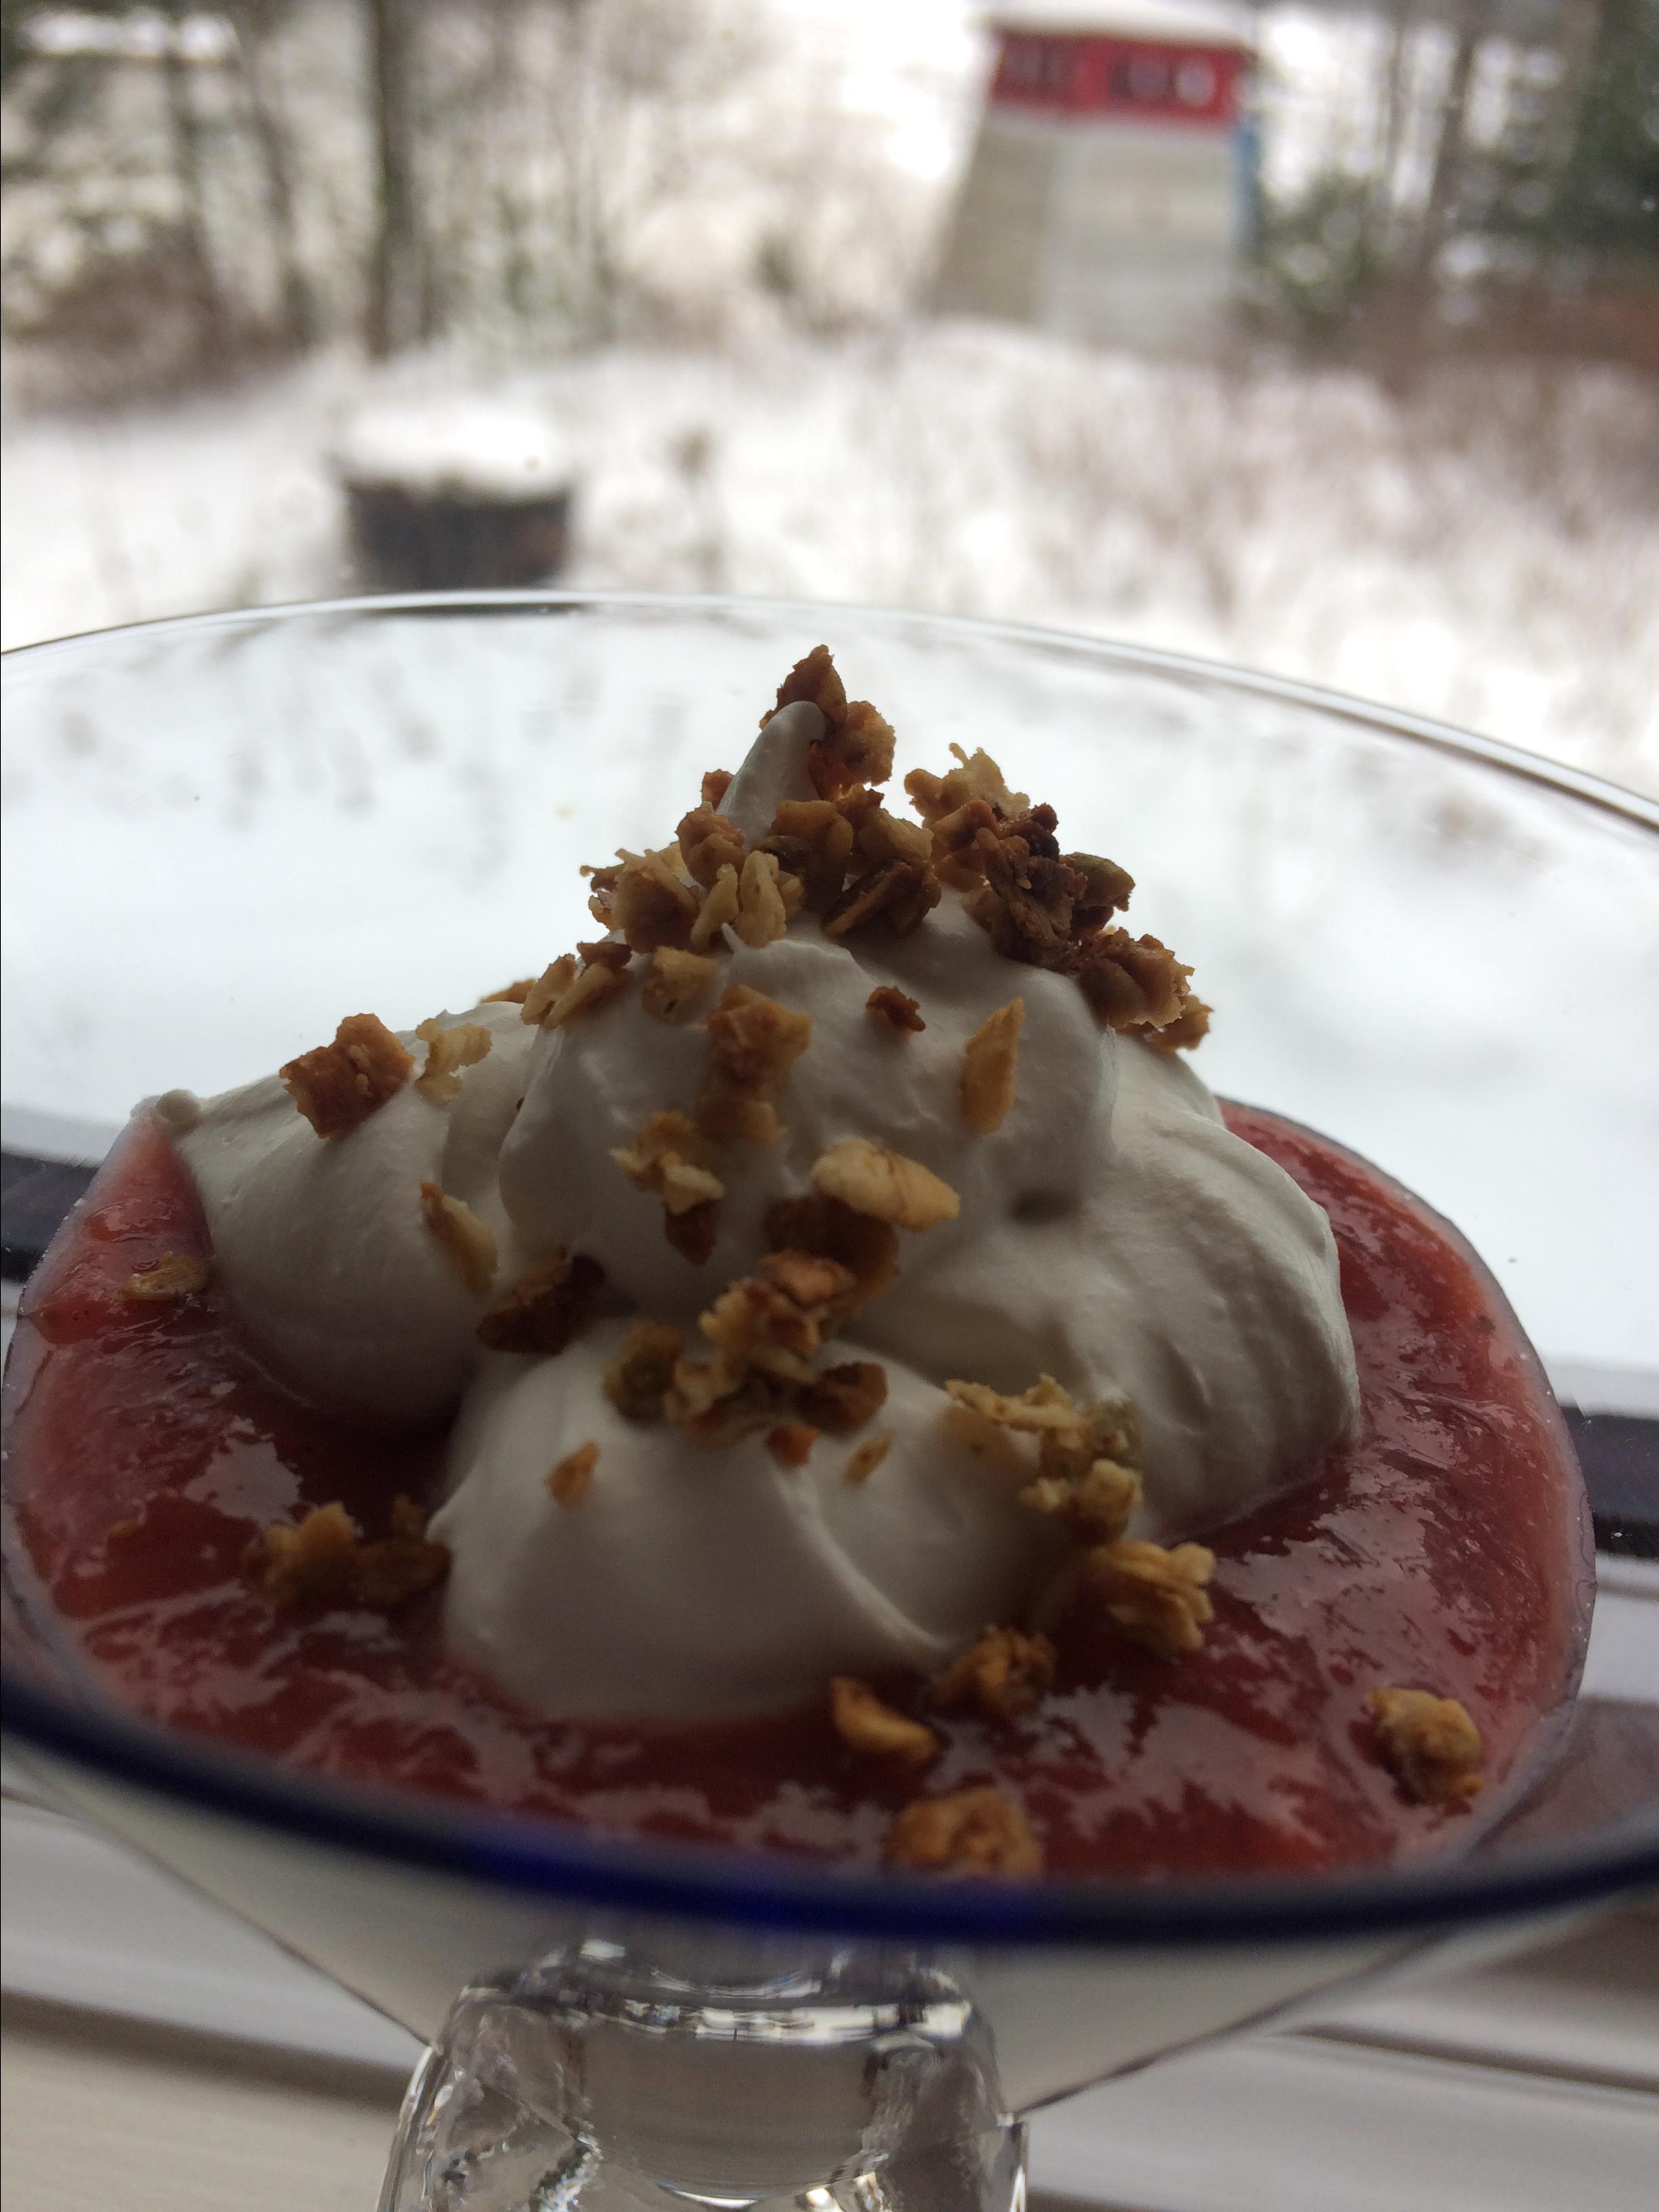 Strawberry Rhubarb Compote with Vanilla Bean-Infused Coconut Cream